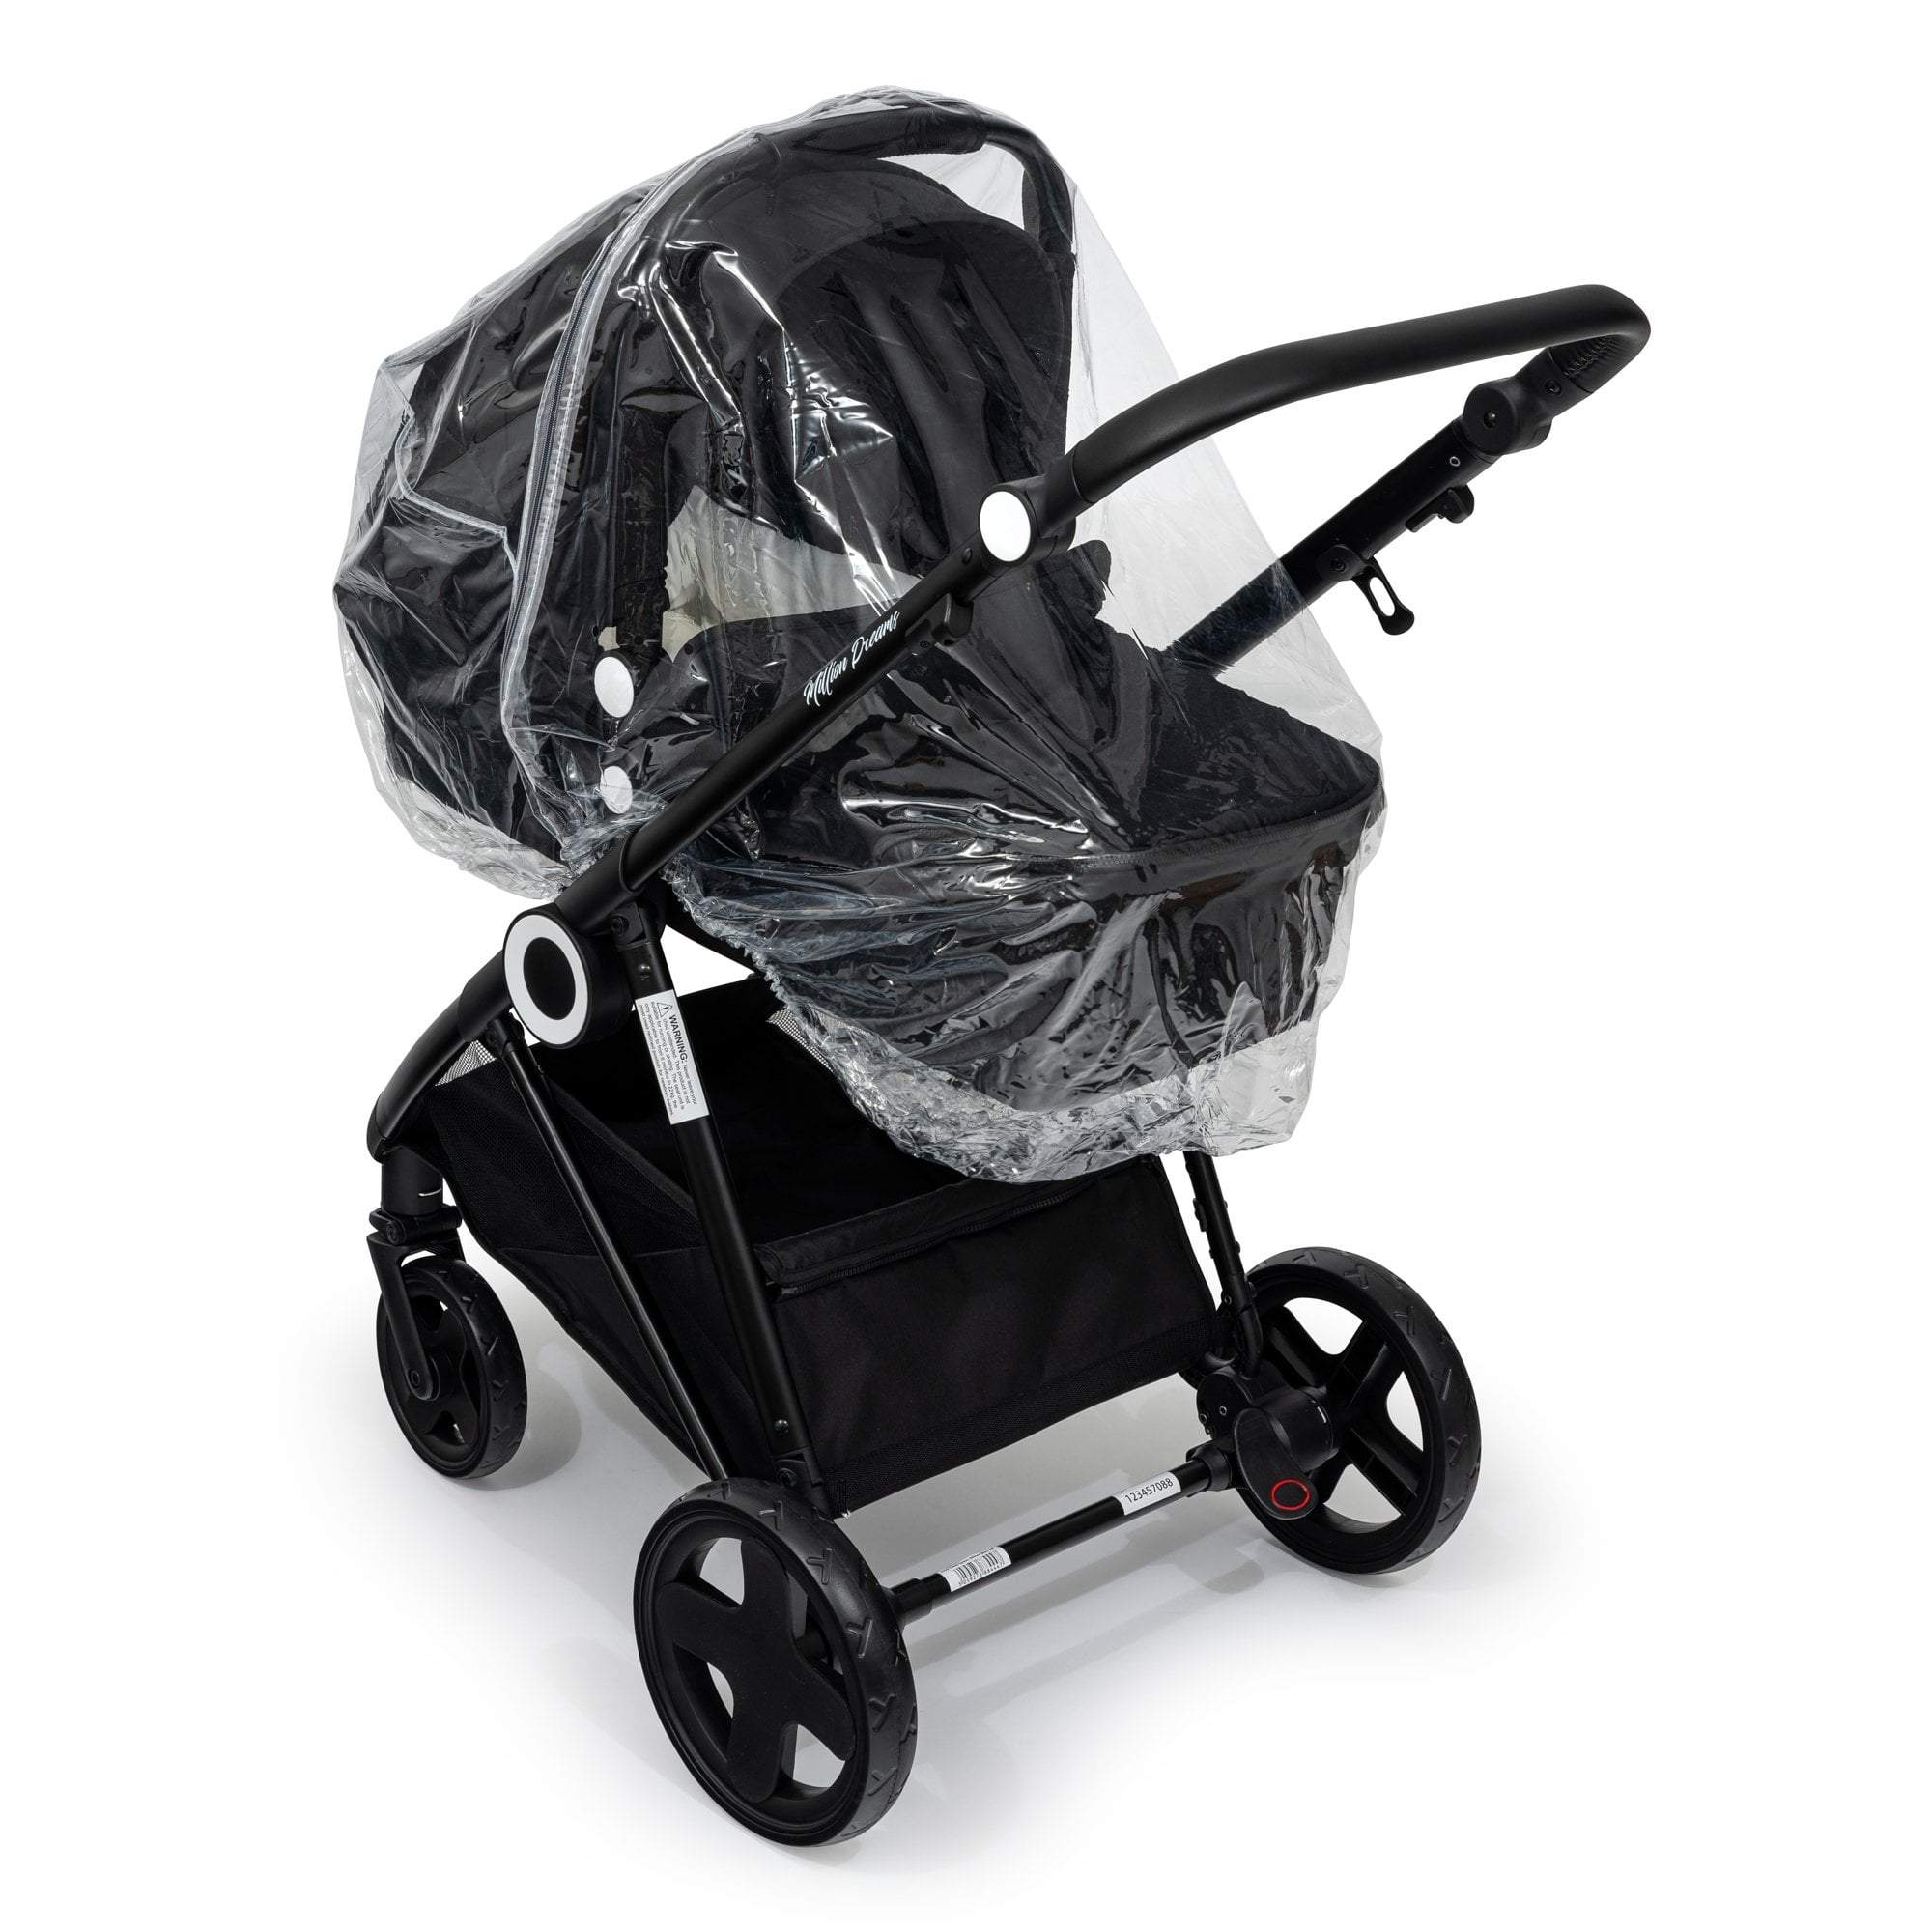 Carrycot Raincover Compatible With Valco - Fits All Models - For Your Little One